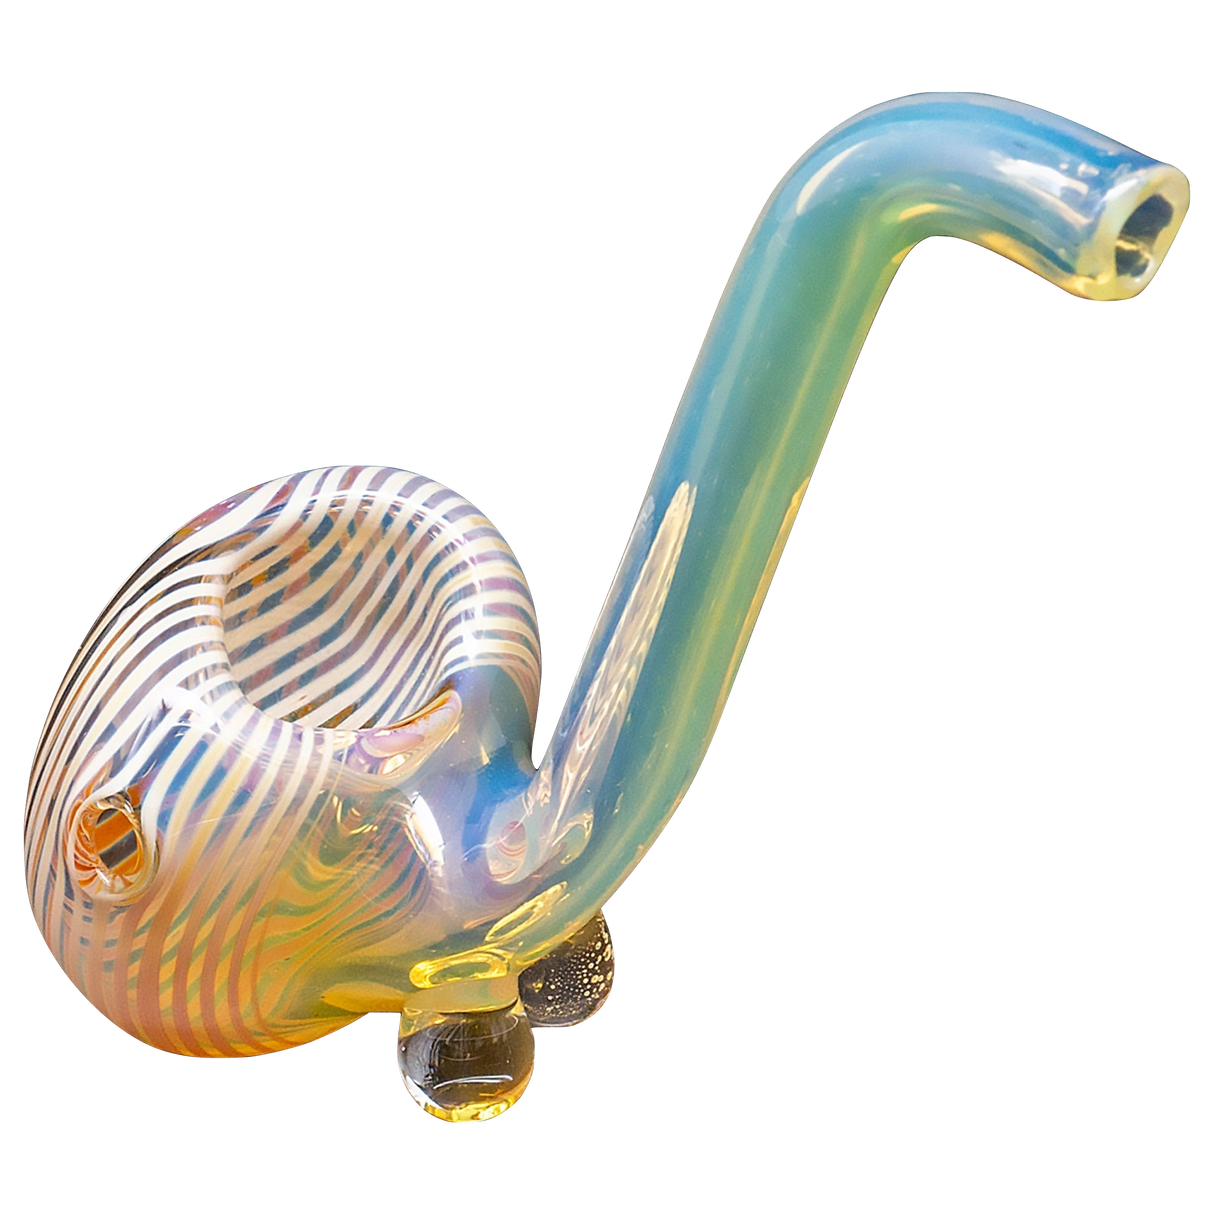 LA Pipes Spoon Hand Pipe in Borosilicate Glass with Striped Design - Angled Side View